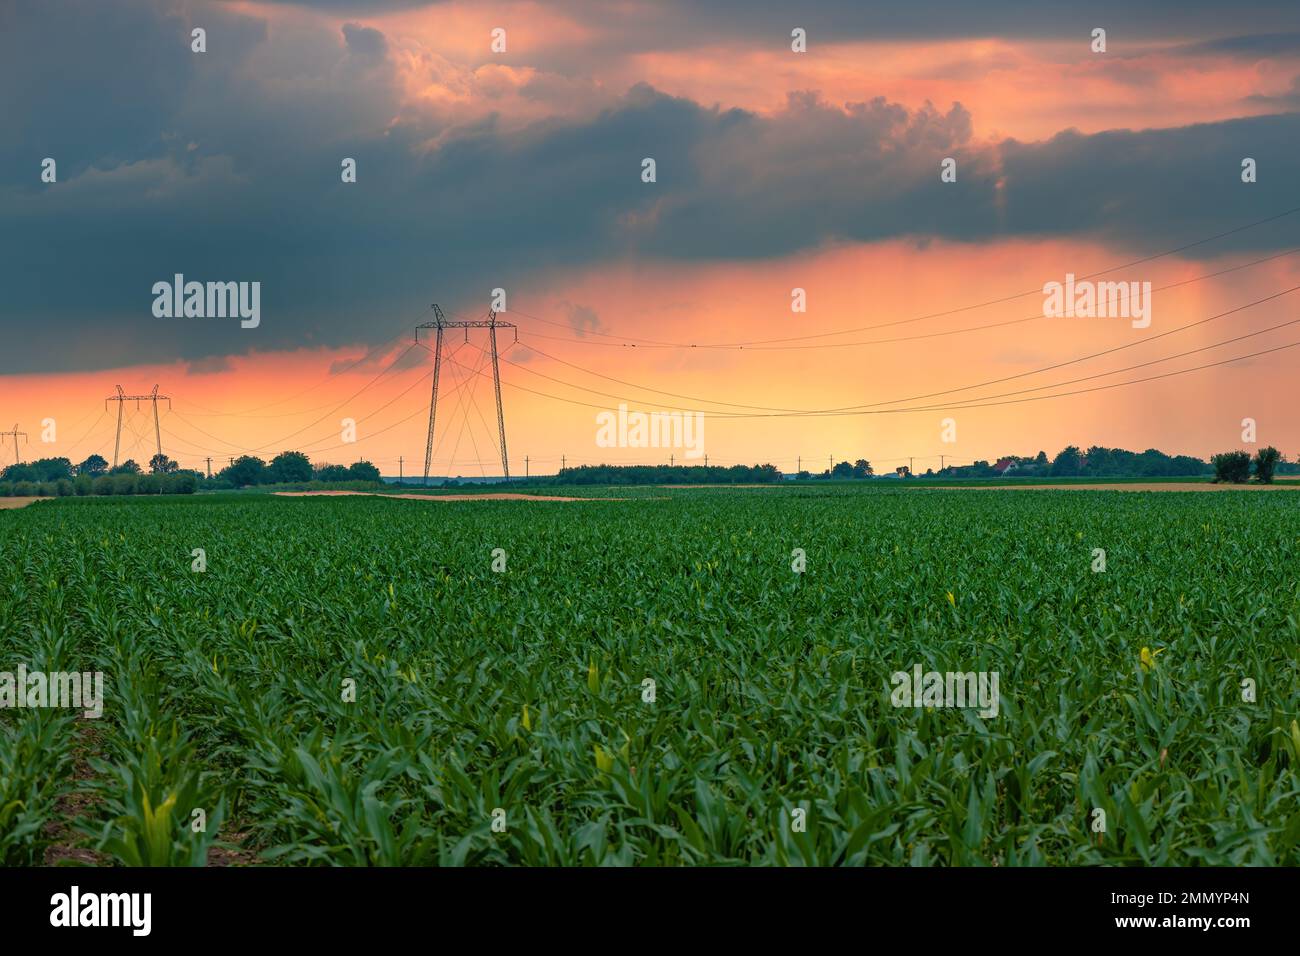 Electricity pylon transmission towers with overhead power line cables in cultivated corn crop field in sunset with stormy clouds in background to emph Stock Photo